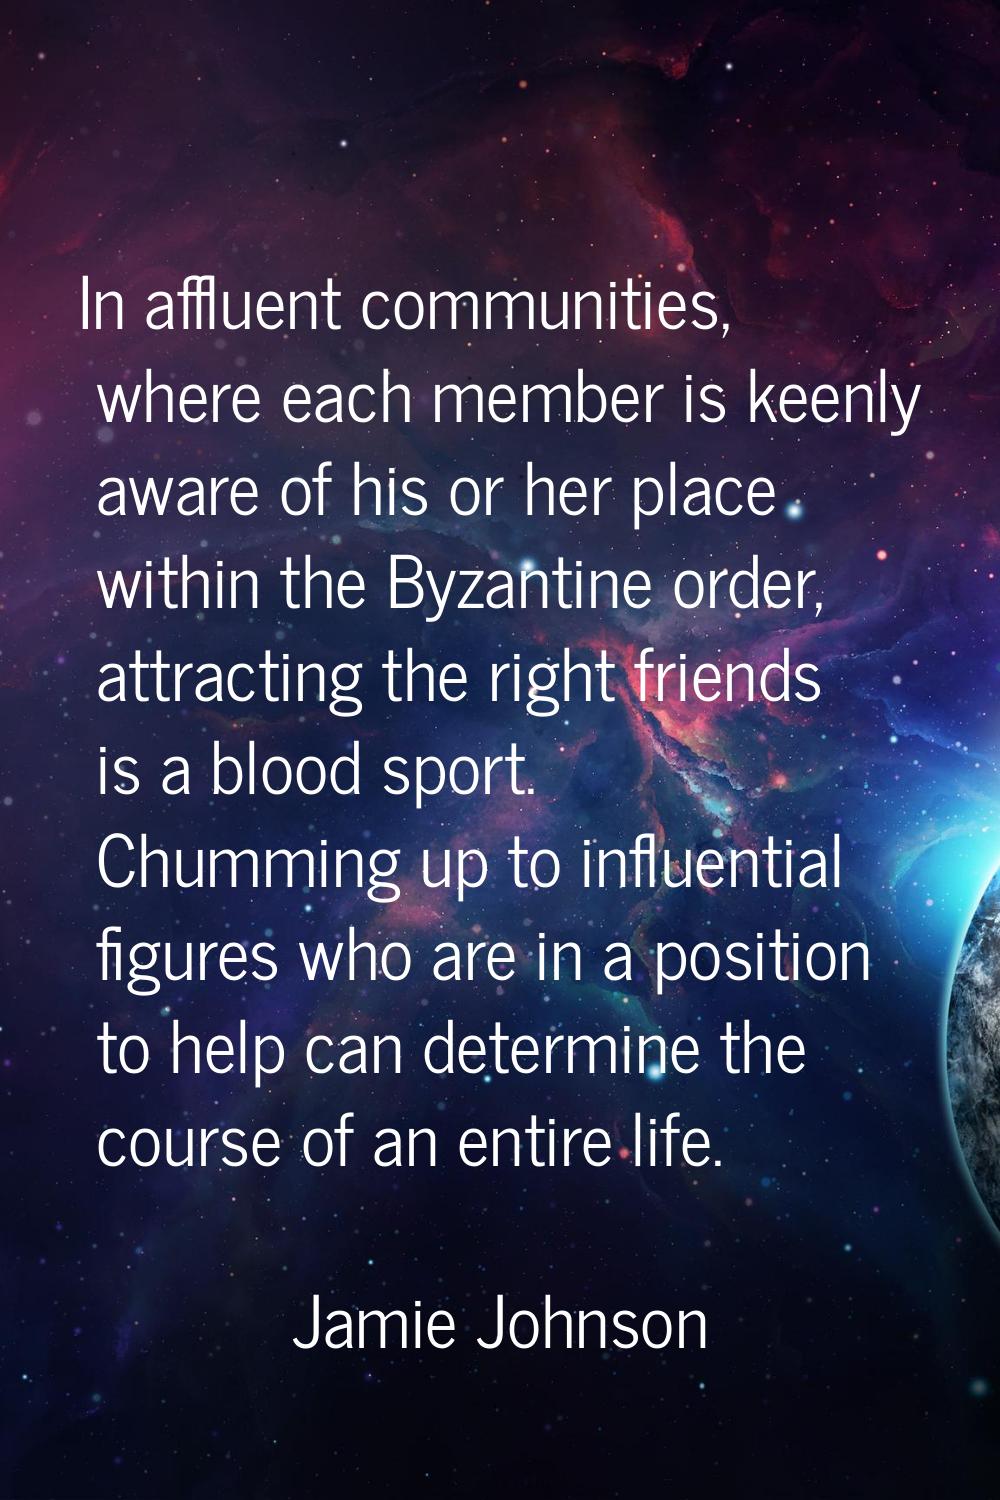 In affluent communities, where each member is keenly aware of his or her place within the Byzantine